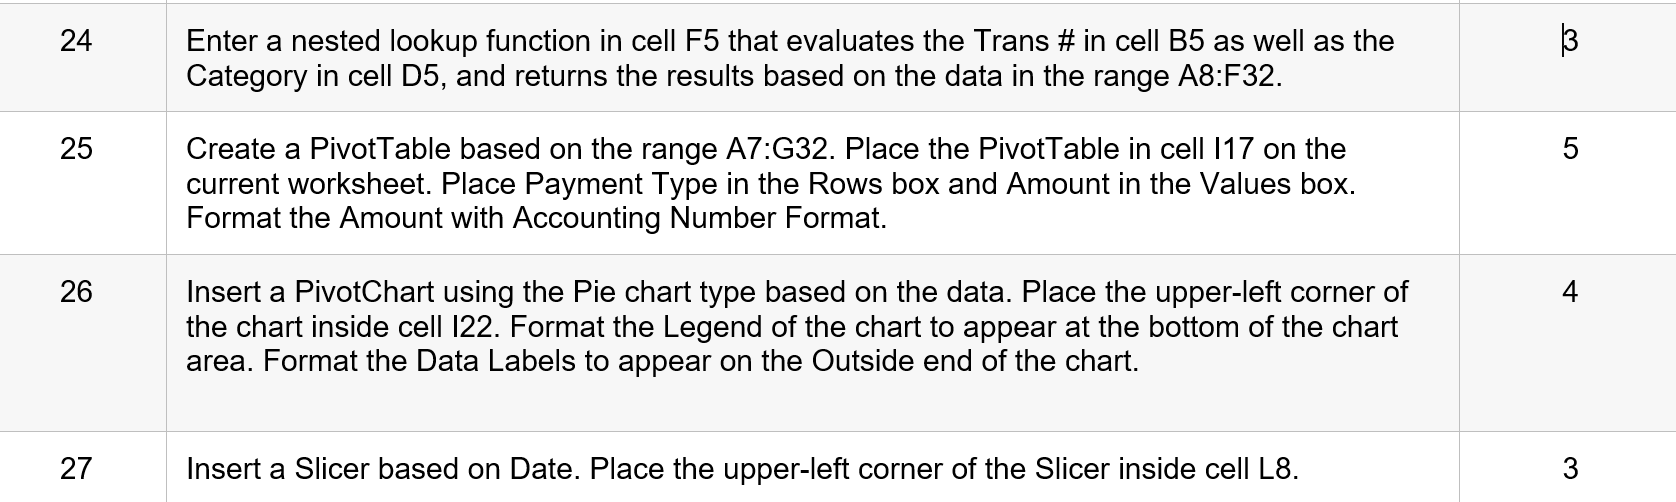 24 25 26 27 Enter a nested lookup function in cell F5 that evaluates the Trans # in cell B5 as well as the